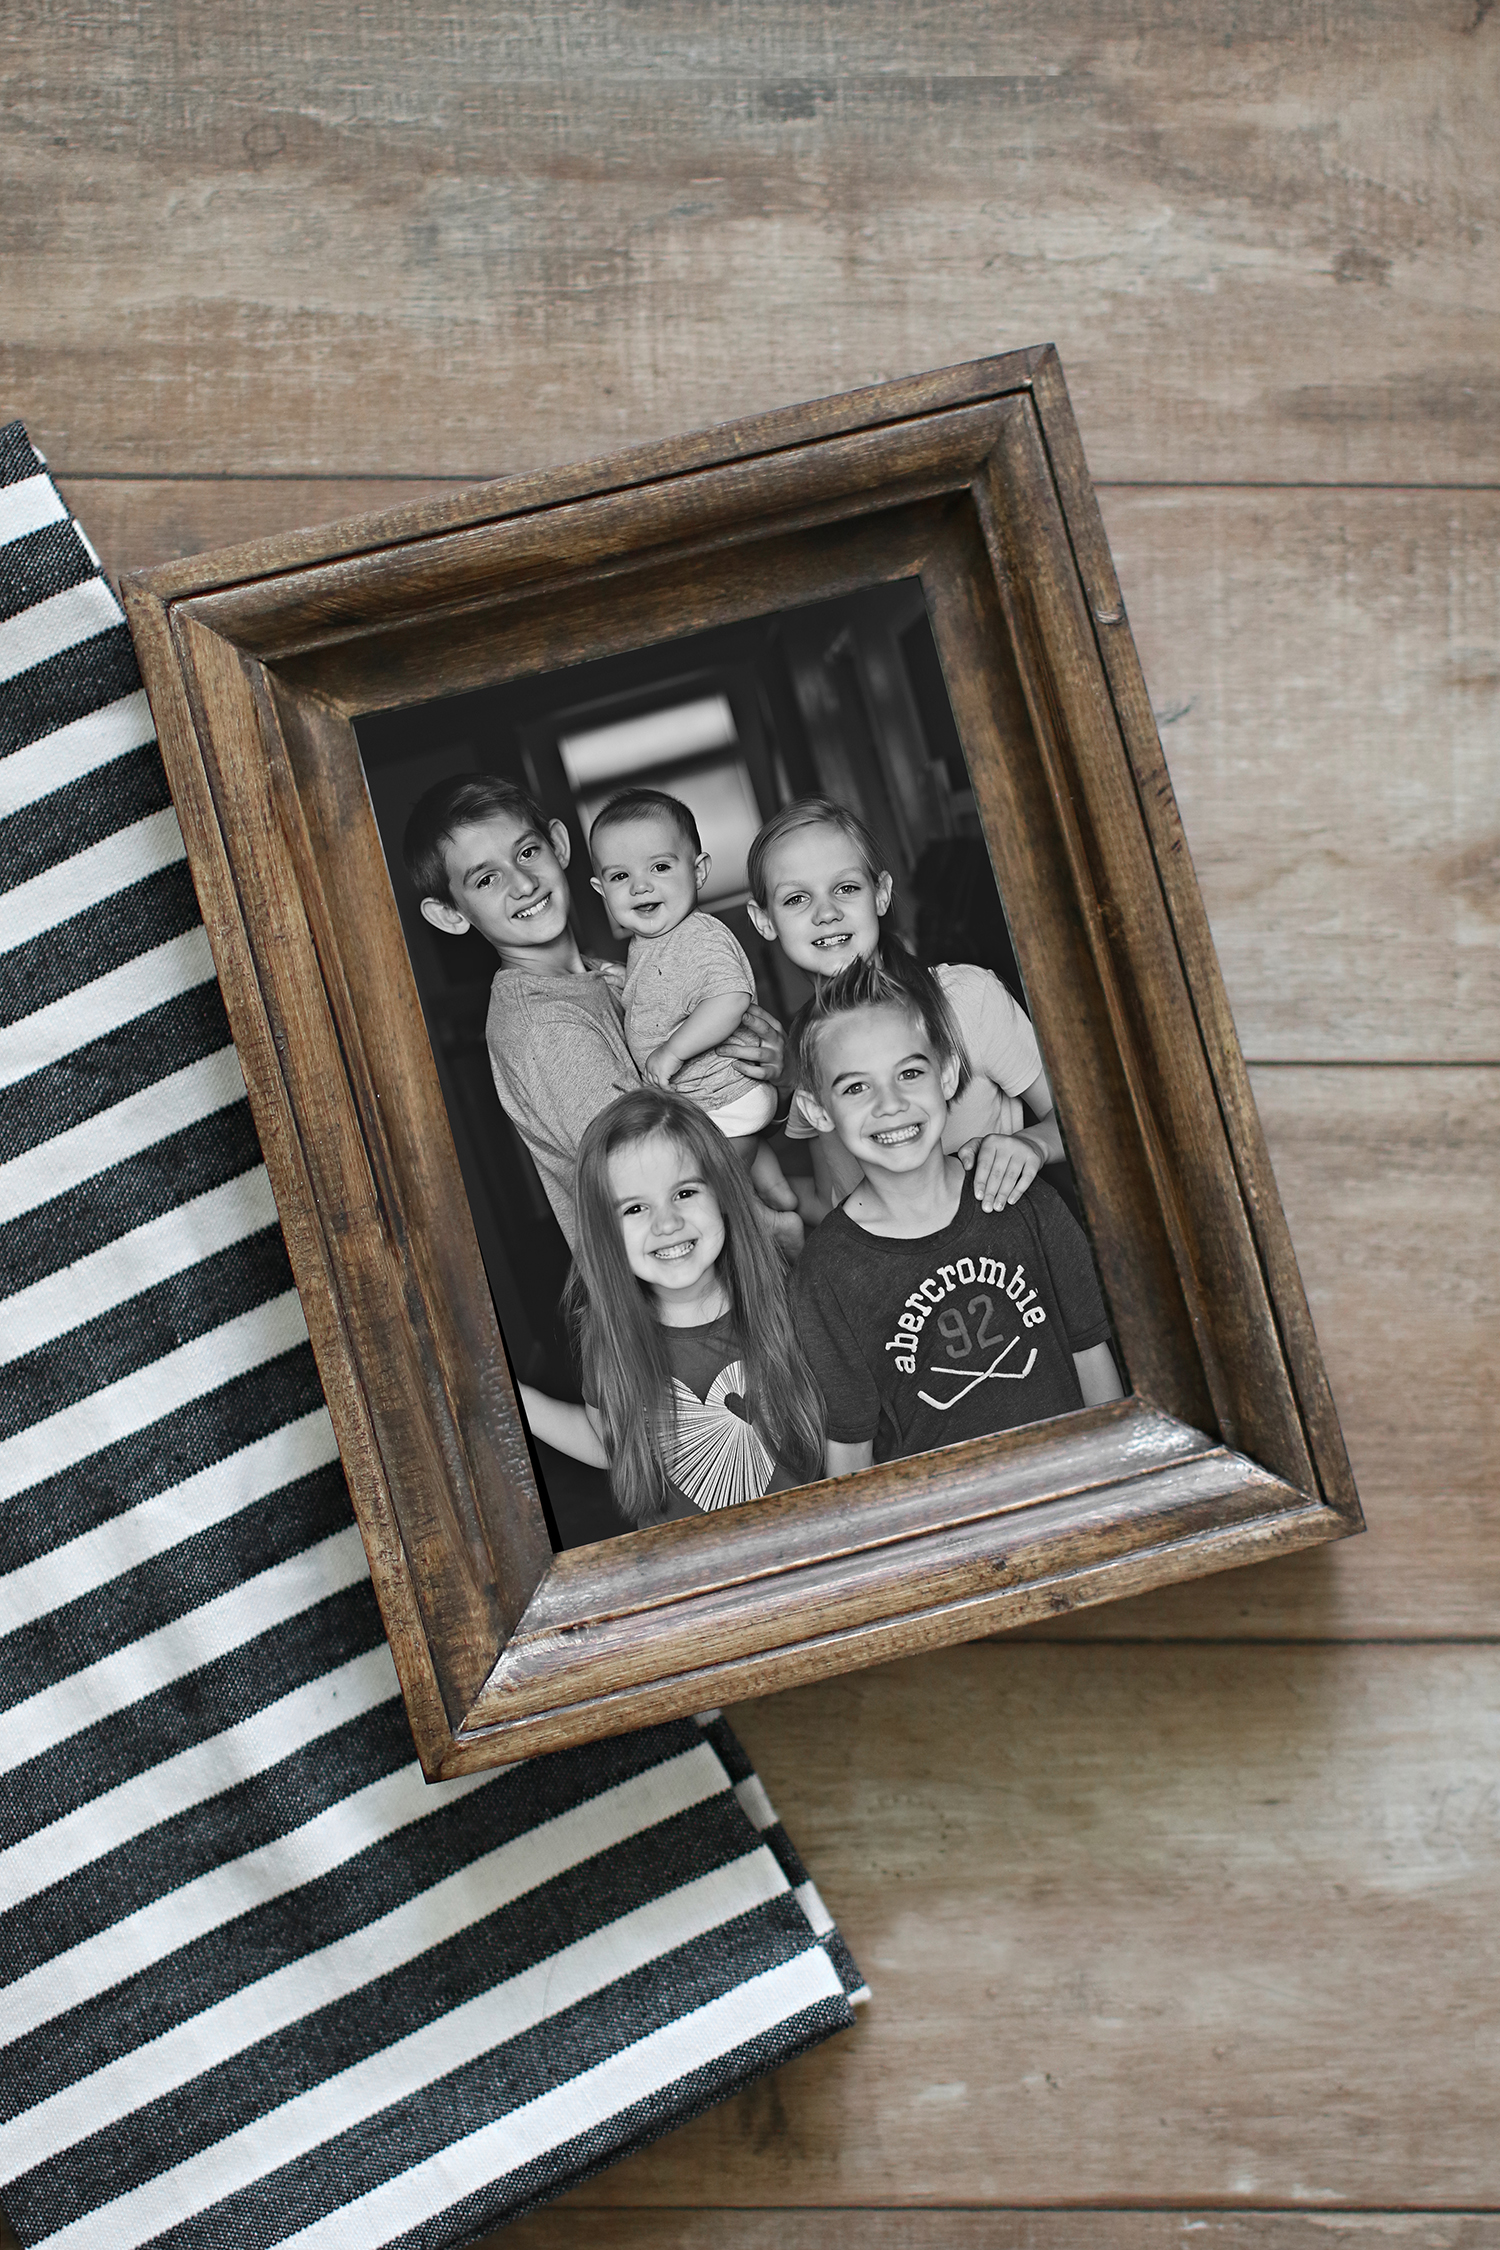 A Father's Day Gift Idea and Family Tradition #FathersDay #GiftIdea